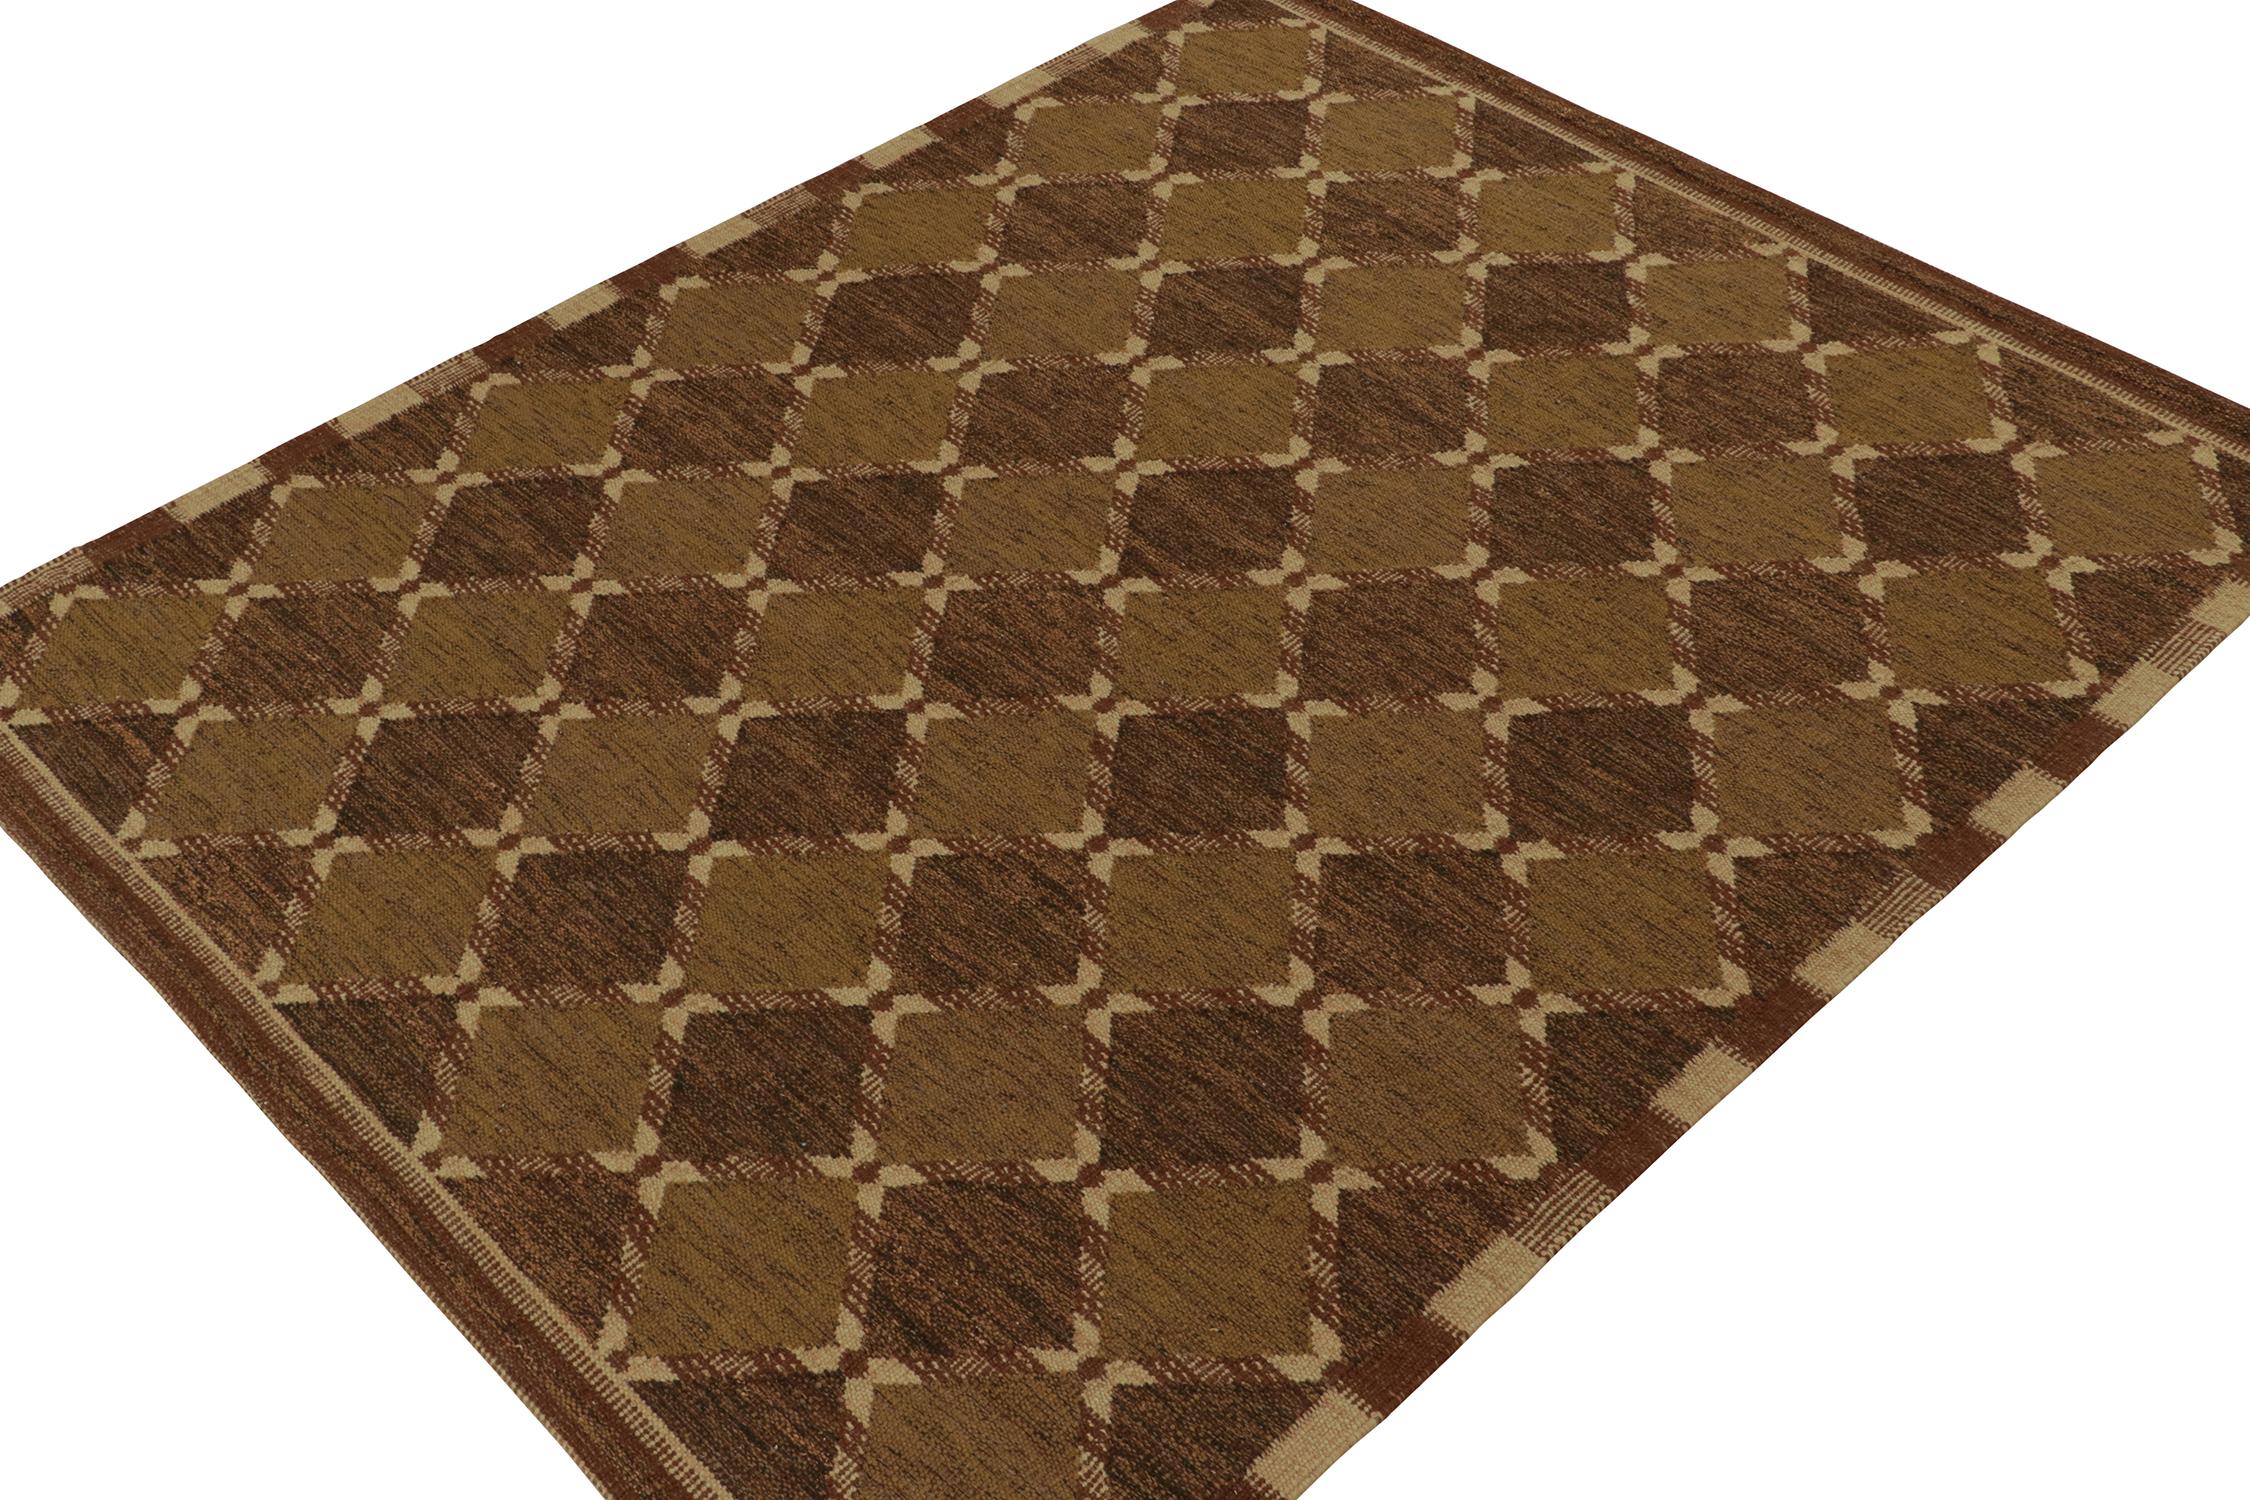 A Swedish style custom kilim from Rug & Kilim’s award-winning Scandinavian flat weave collection. Handwoven in wool with silk and cotton accents.
Further on the design: 
This rug enjoys a smart, natural movement with crisp trellis patterns in warm